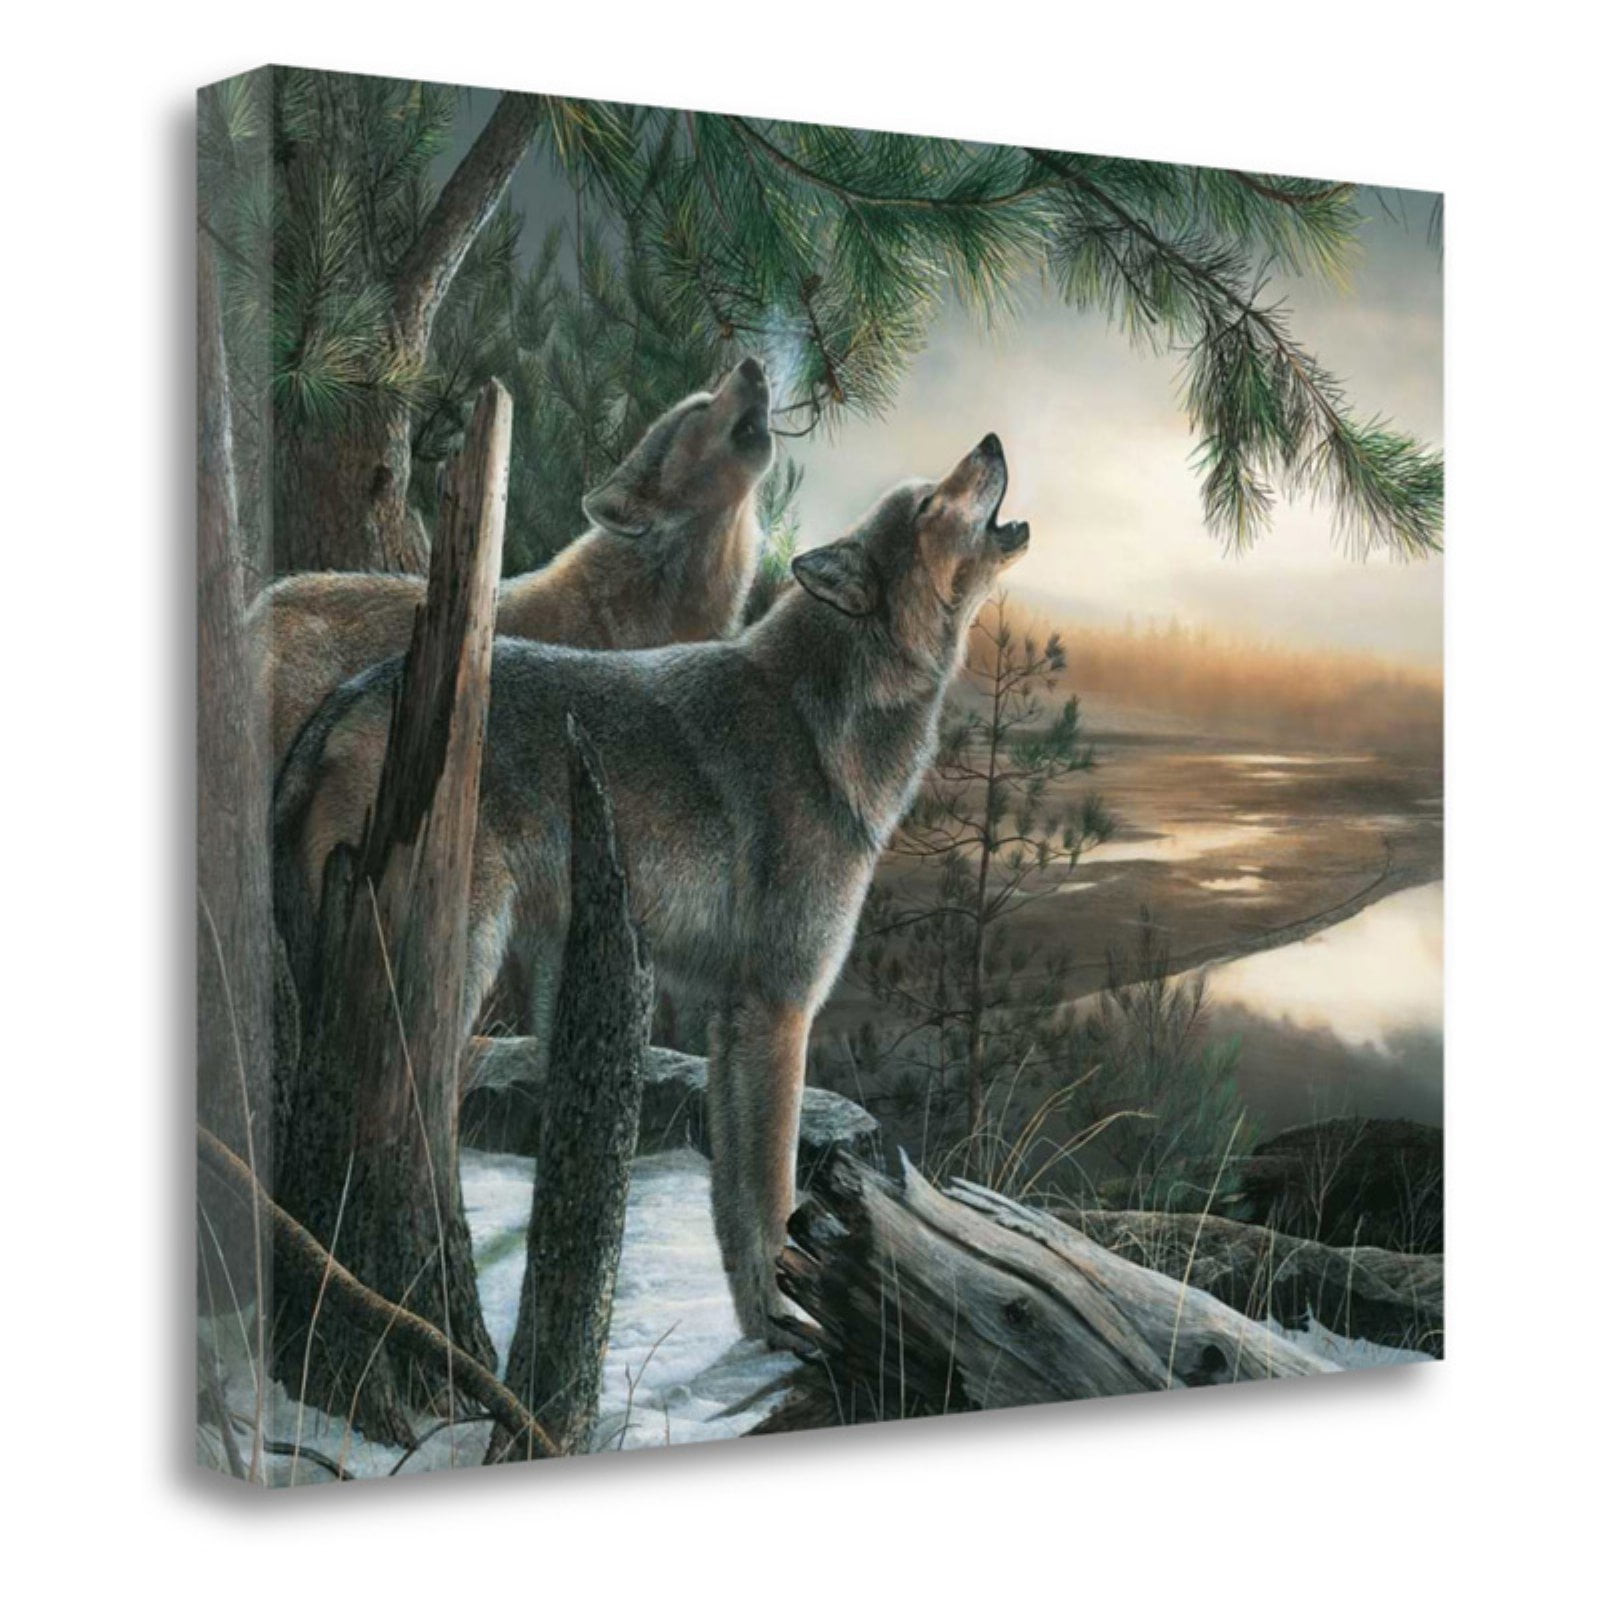 Call Of The Wild By Kevin Daniel, Fine Art Giclee Print on Gallery Wrap ...